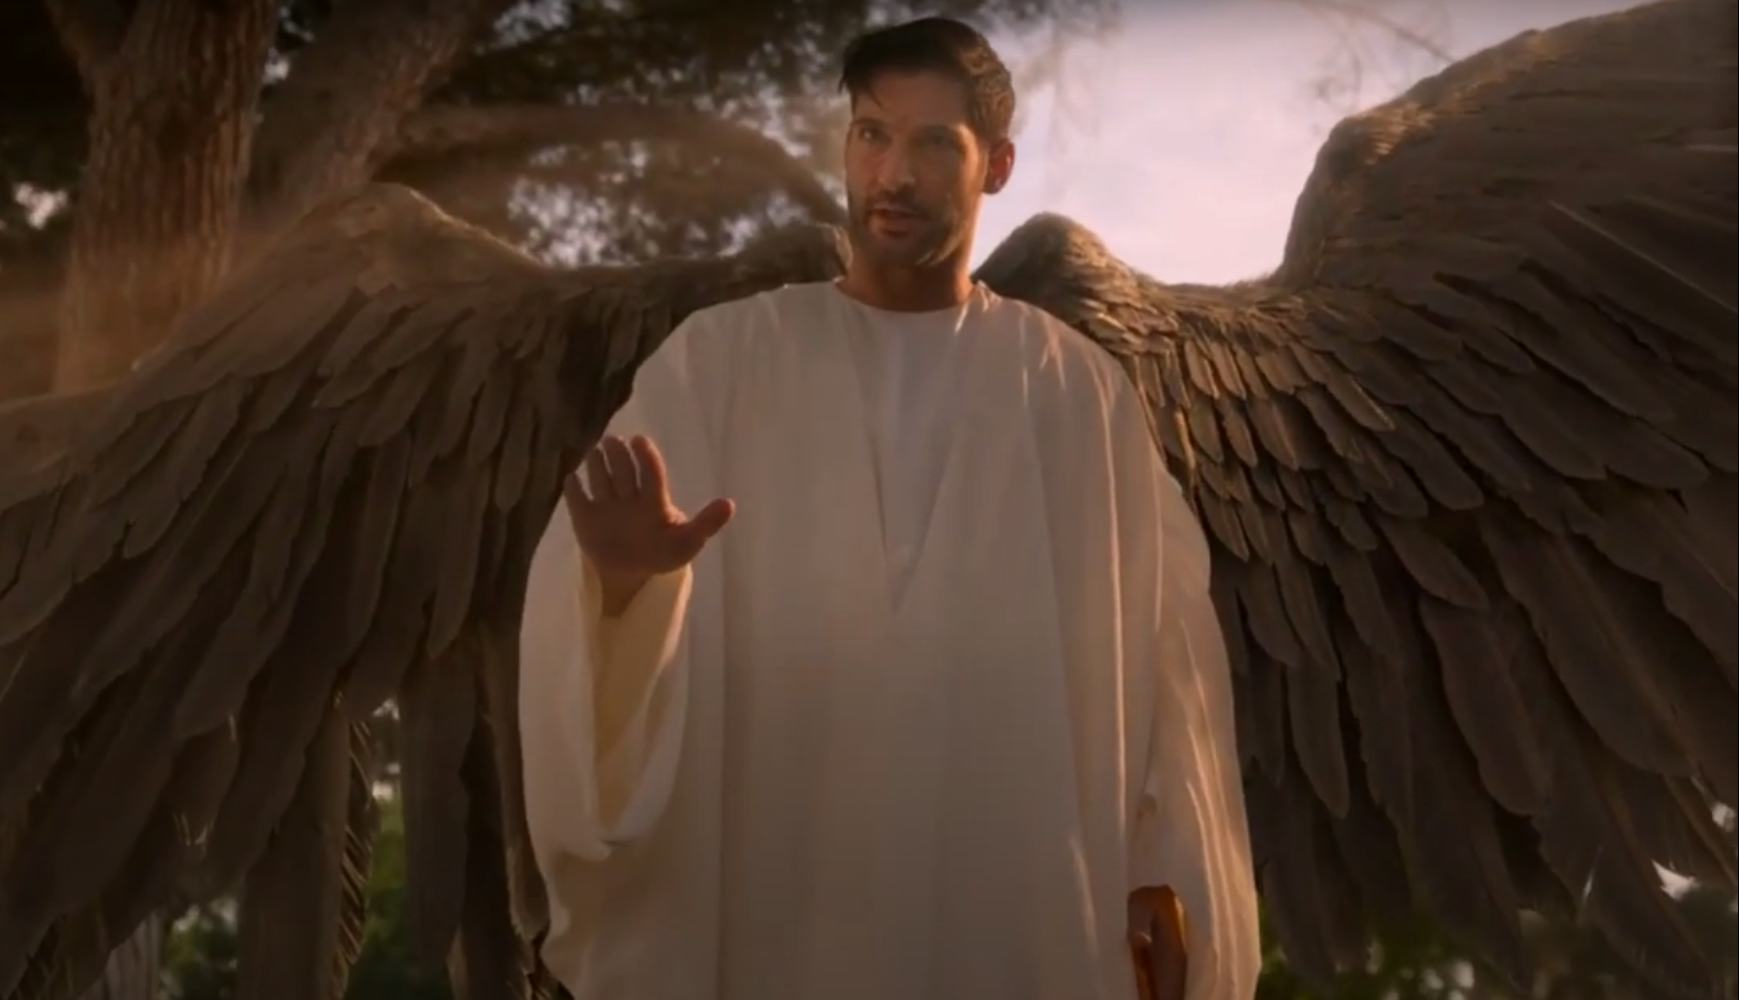 Lucifer Season 5 Part 2 Release Date May Reveal A Wild Prophecy Twist 